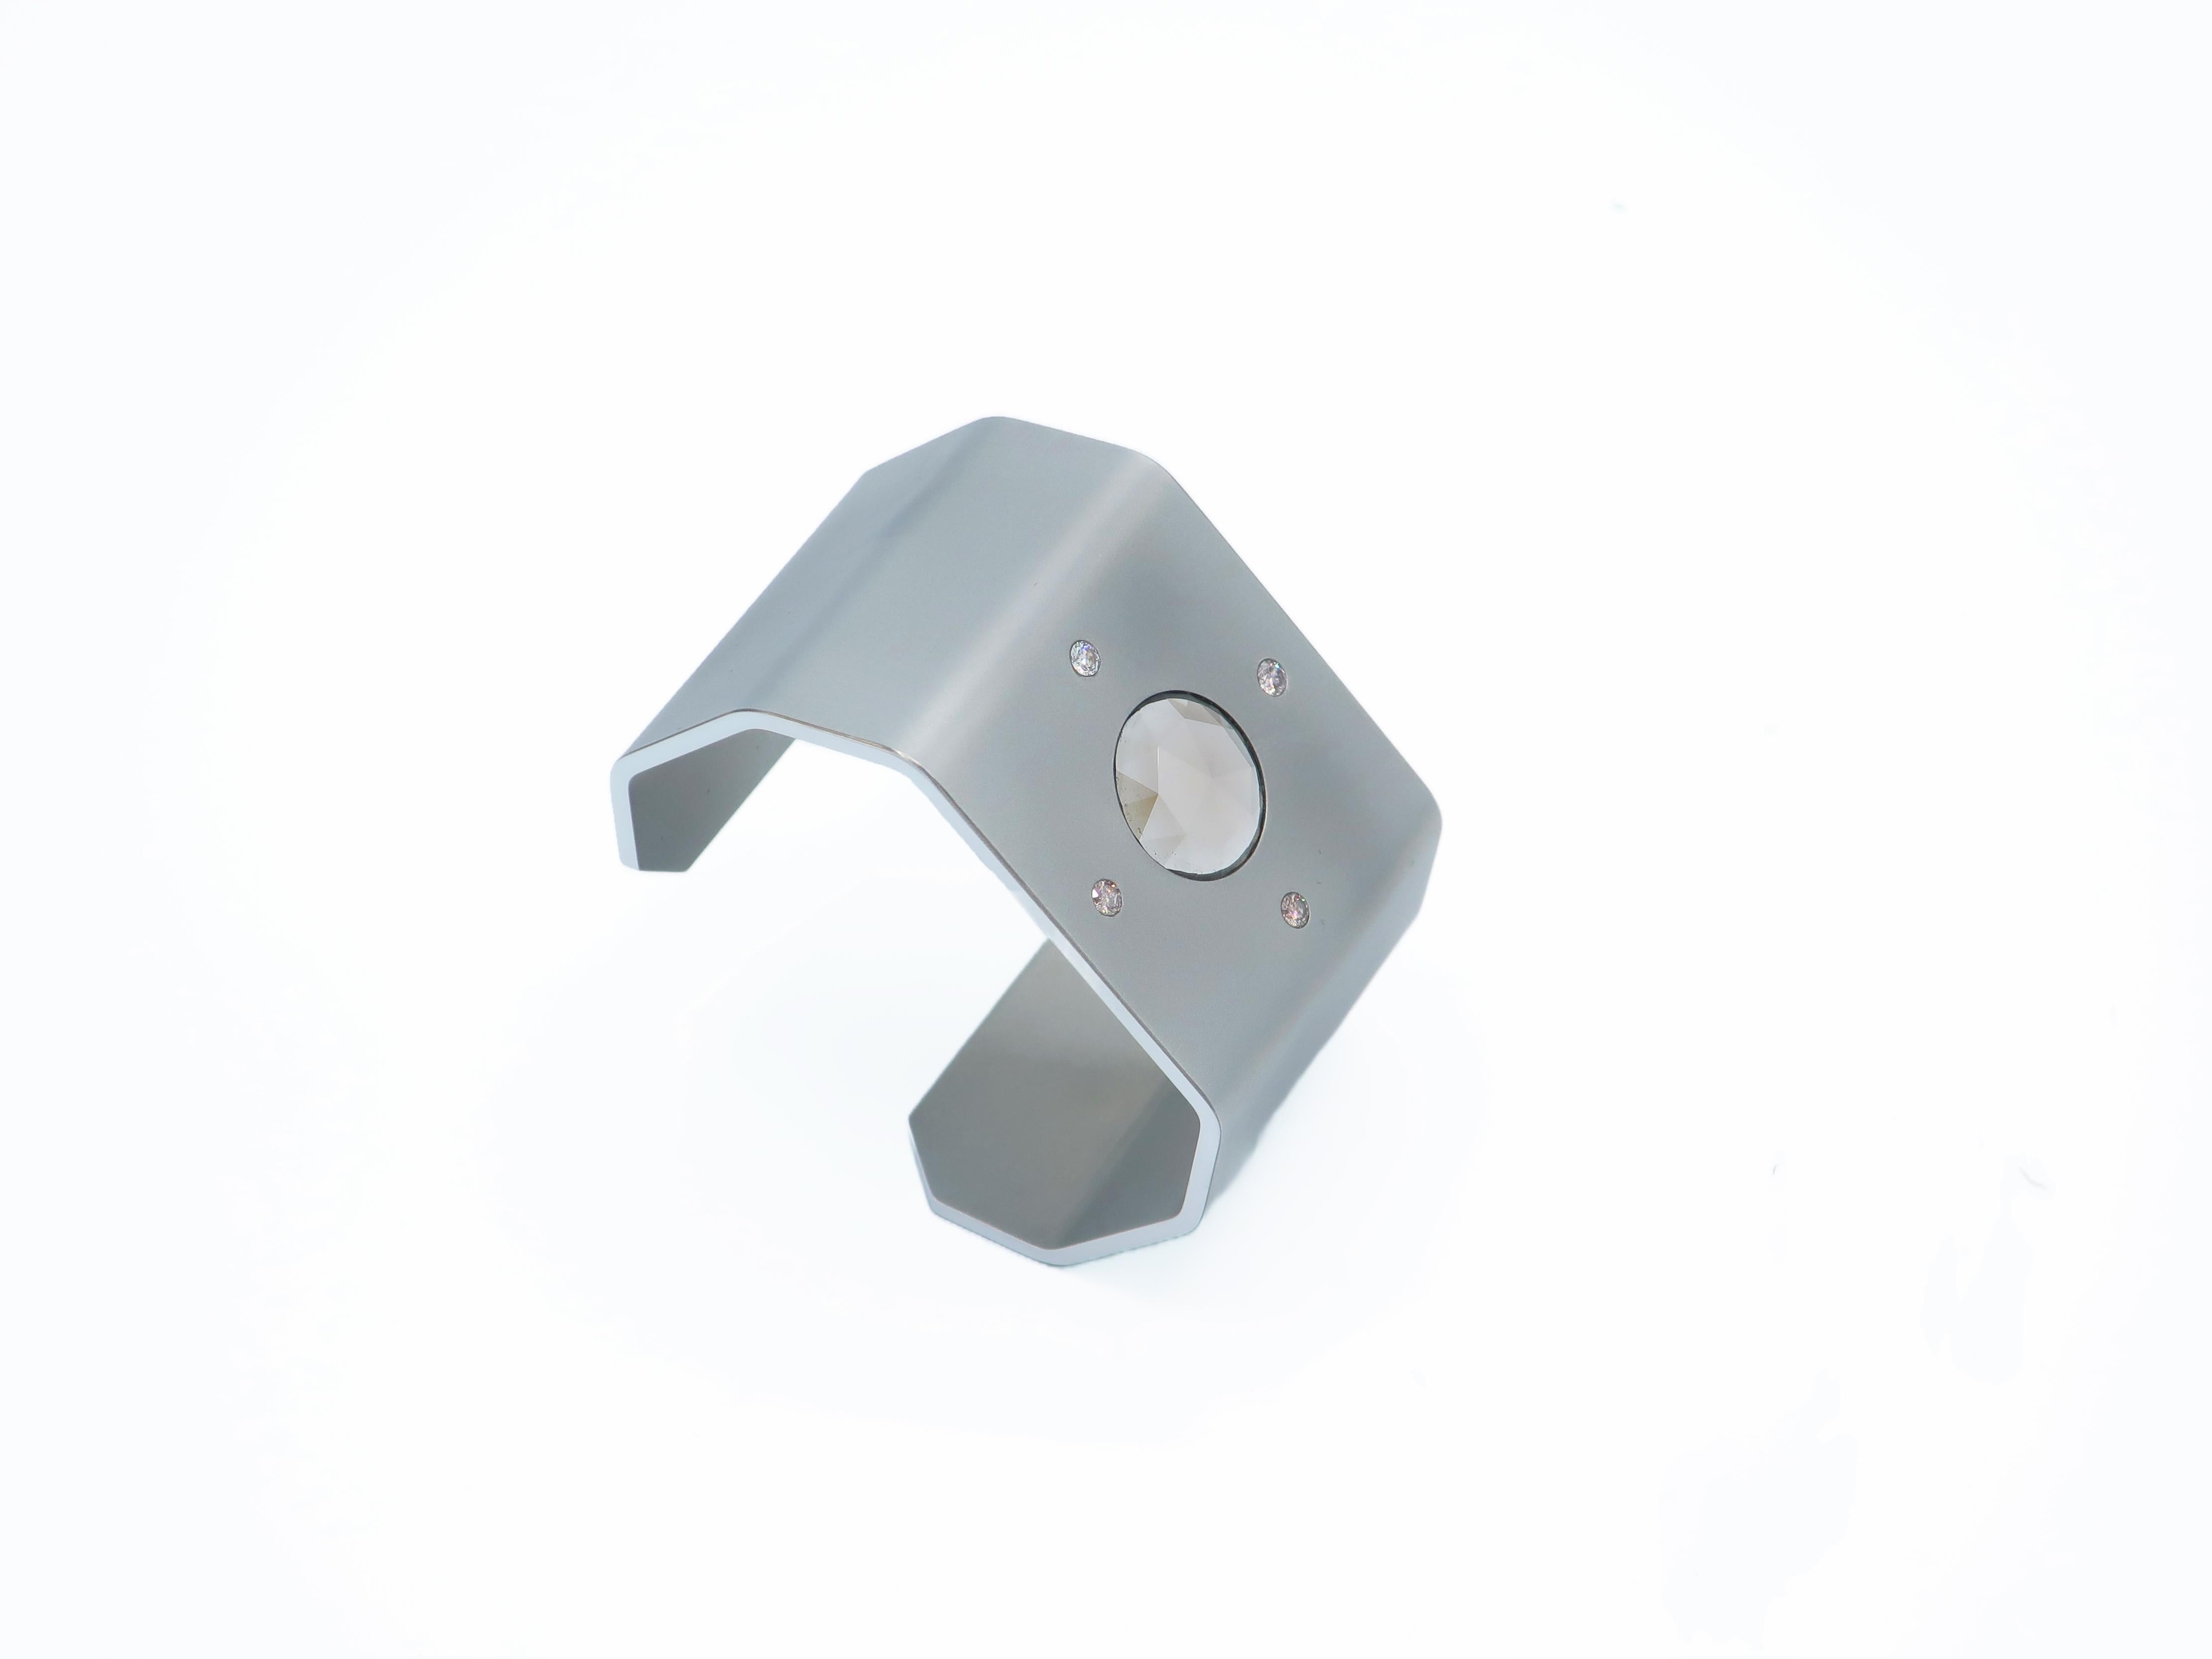 Mirus cuff by Studio C at Second Petale Gallery

